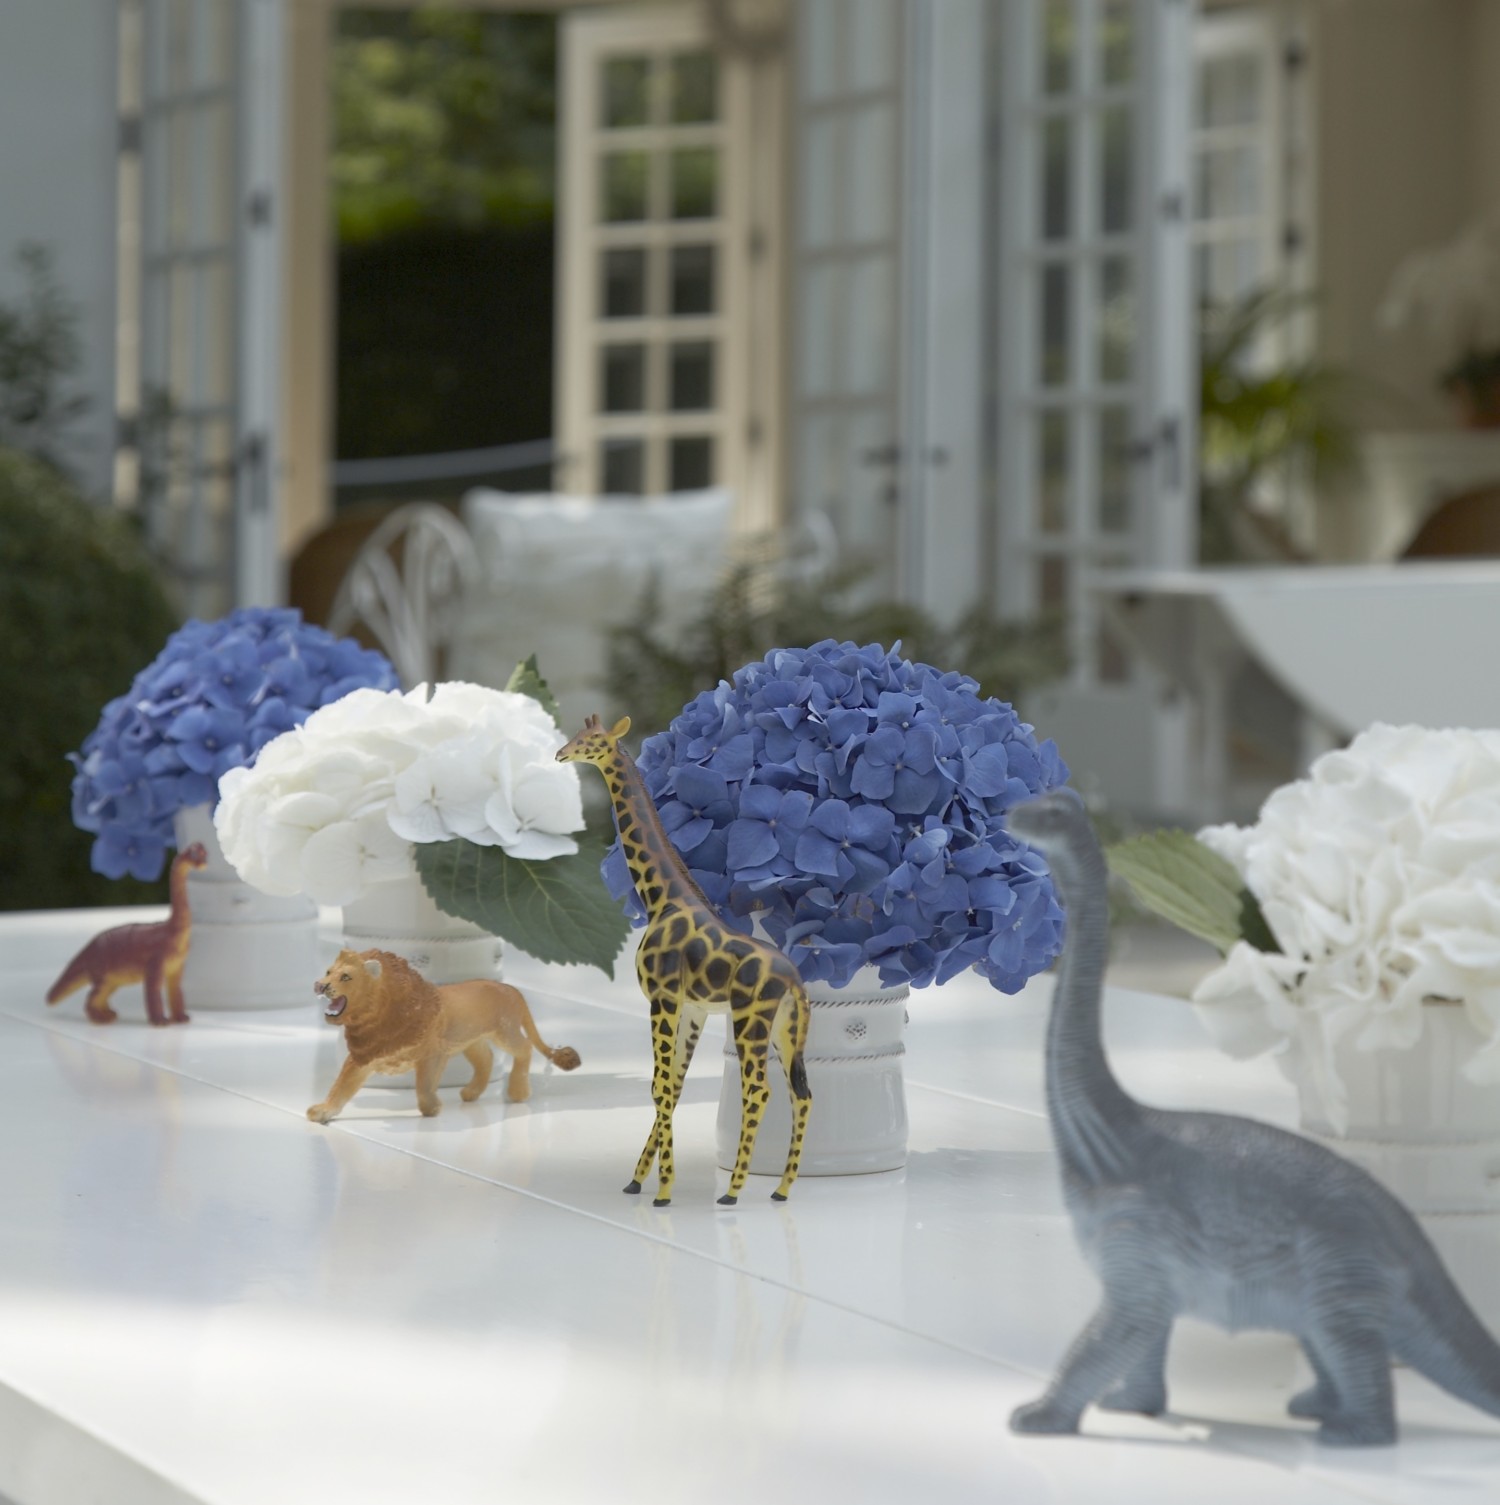 Party table decorated with hydrangeas and dinosaurs and animal figurines.